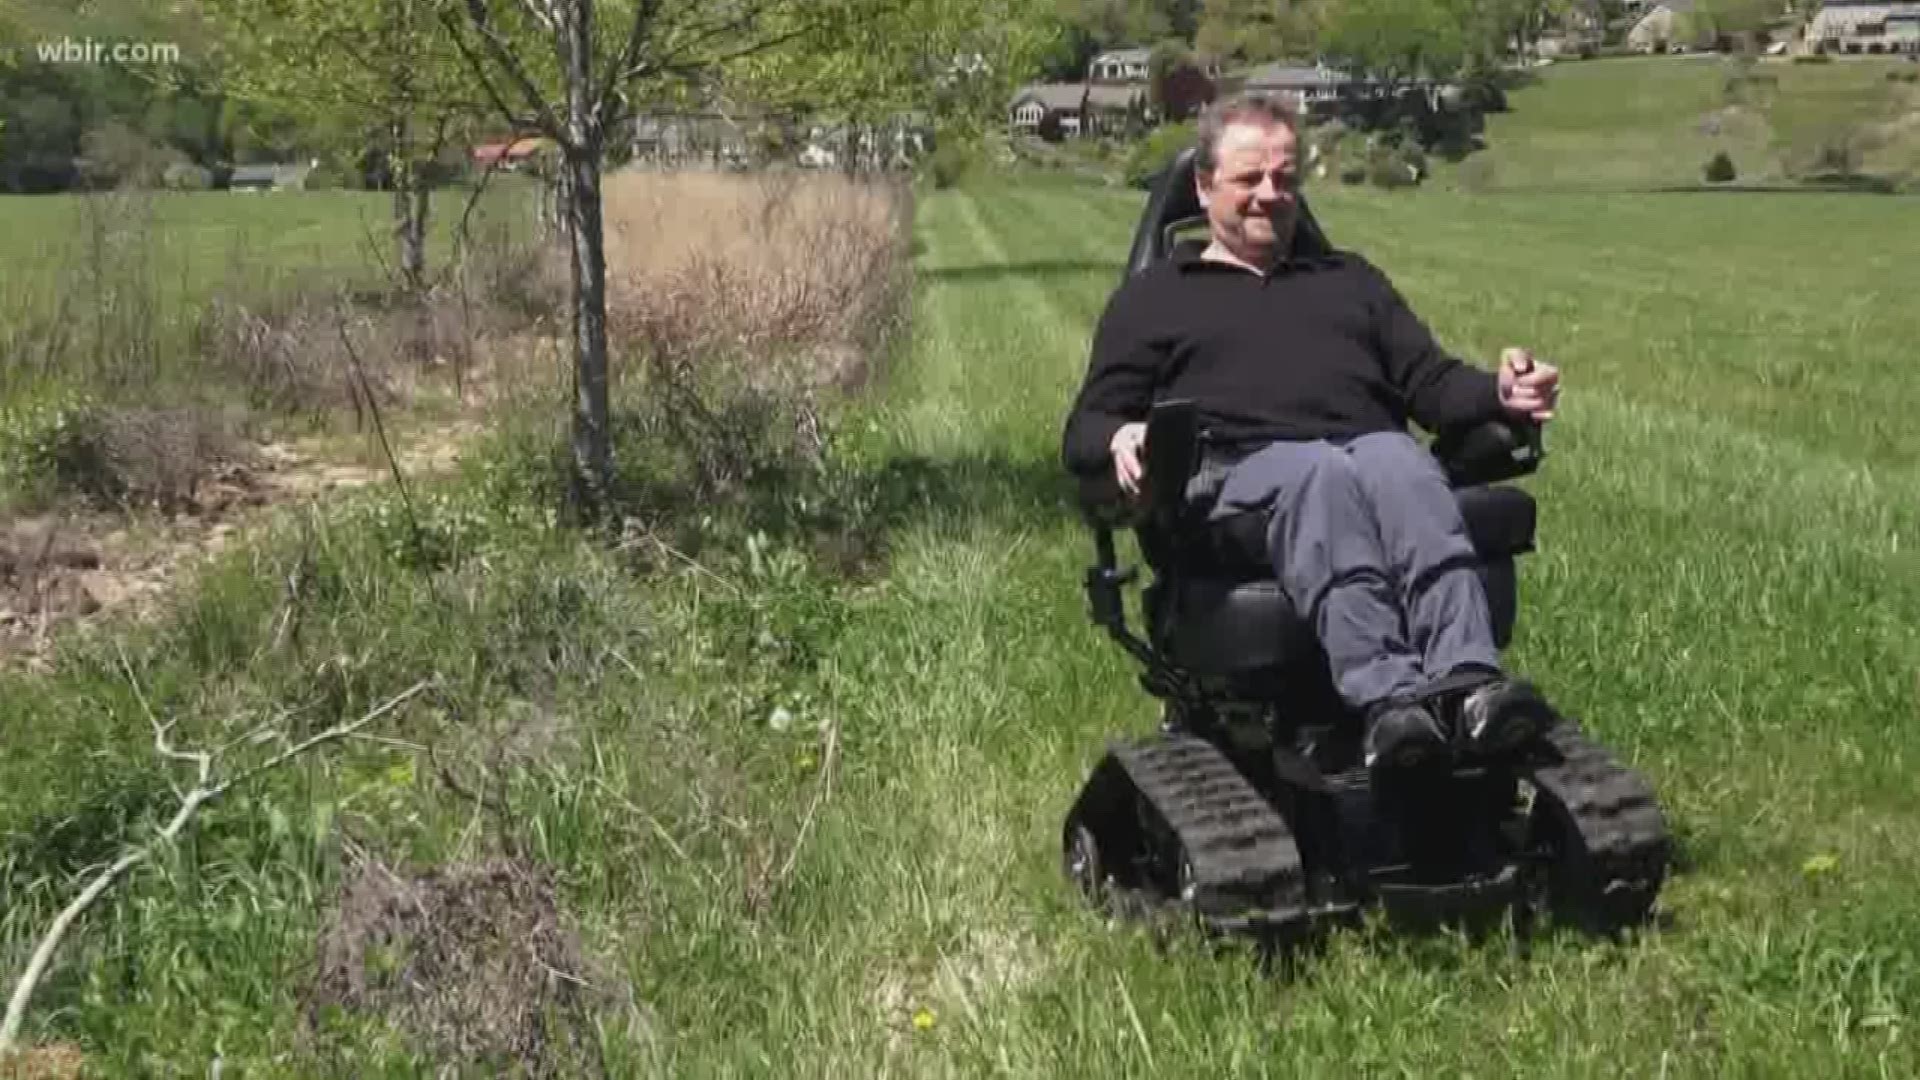 April 20, 2018: Some new all-terrain wheelchairs are giving more people a chance to enjoy the great outdoors, but there's been some confusion about where they're allowed in the Great Smoky Mountains.